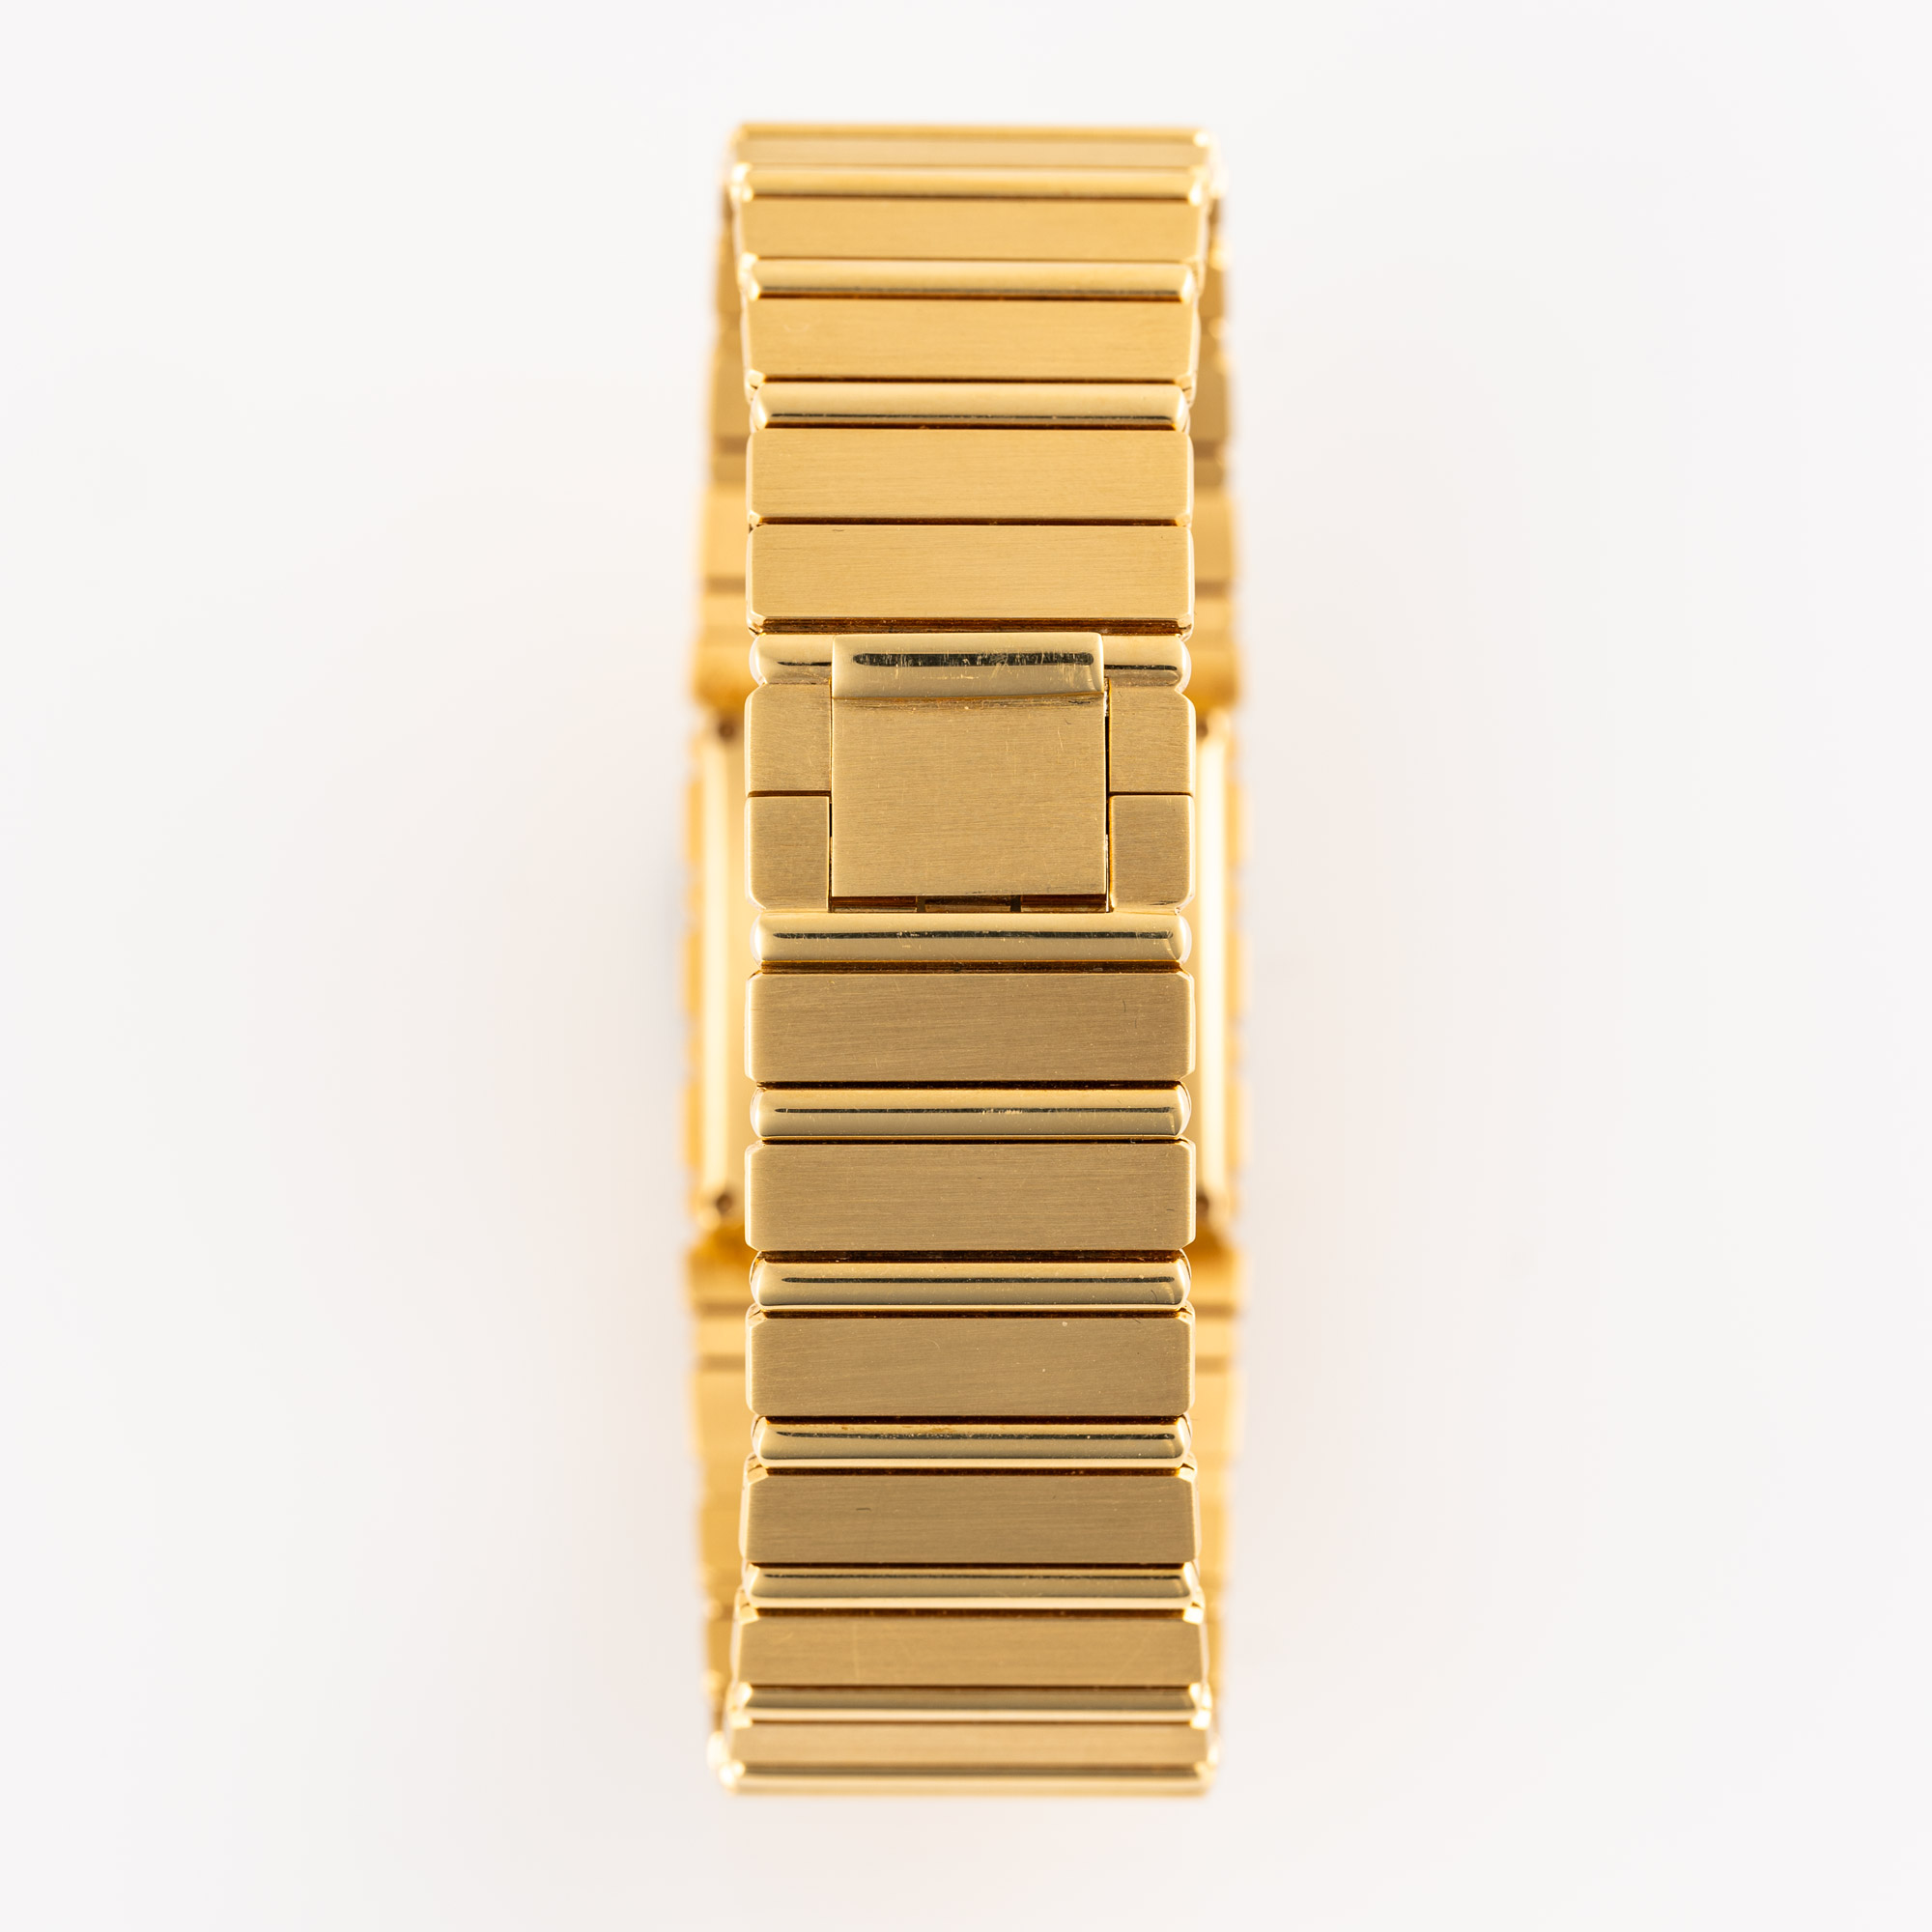 A GENTLEMAN'S SIZE 18K SOLID GOLD PIAGET POLO BRACELET WATCH CIRCA 1970s, REF. 7131 FIRST SERIES - Image 8 of 8